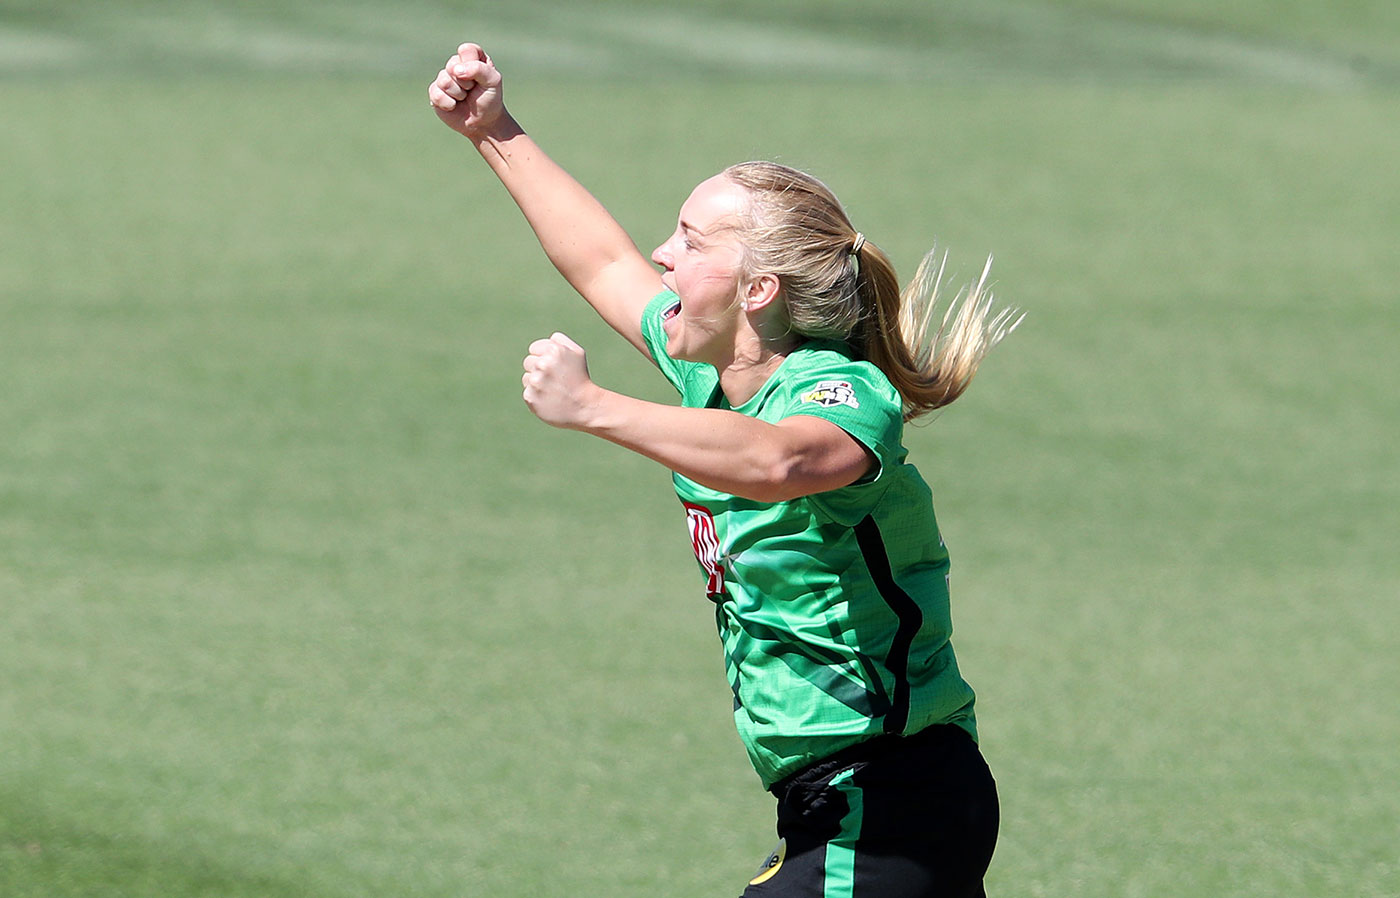 WBBL 2021 | WATCH - Kim Garth bowls a record breaking spell of 3-3-0-3